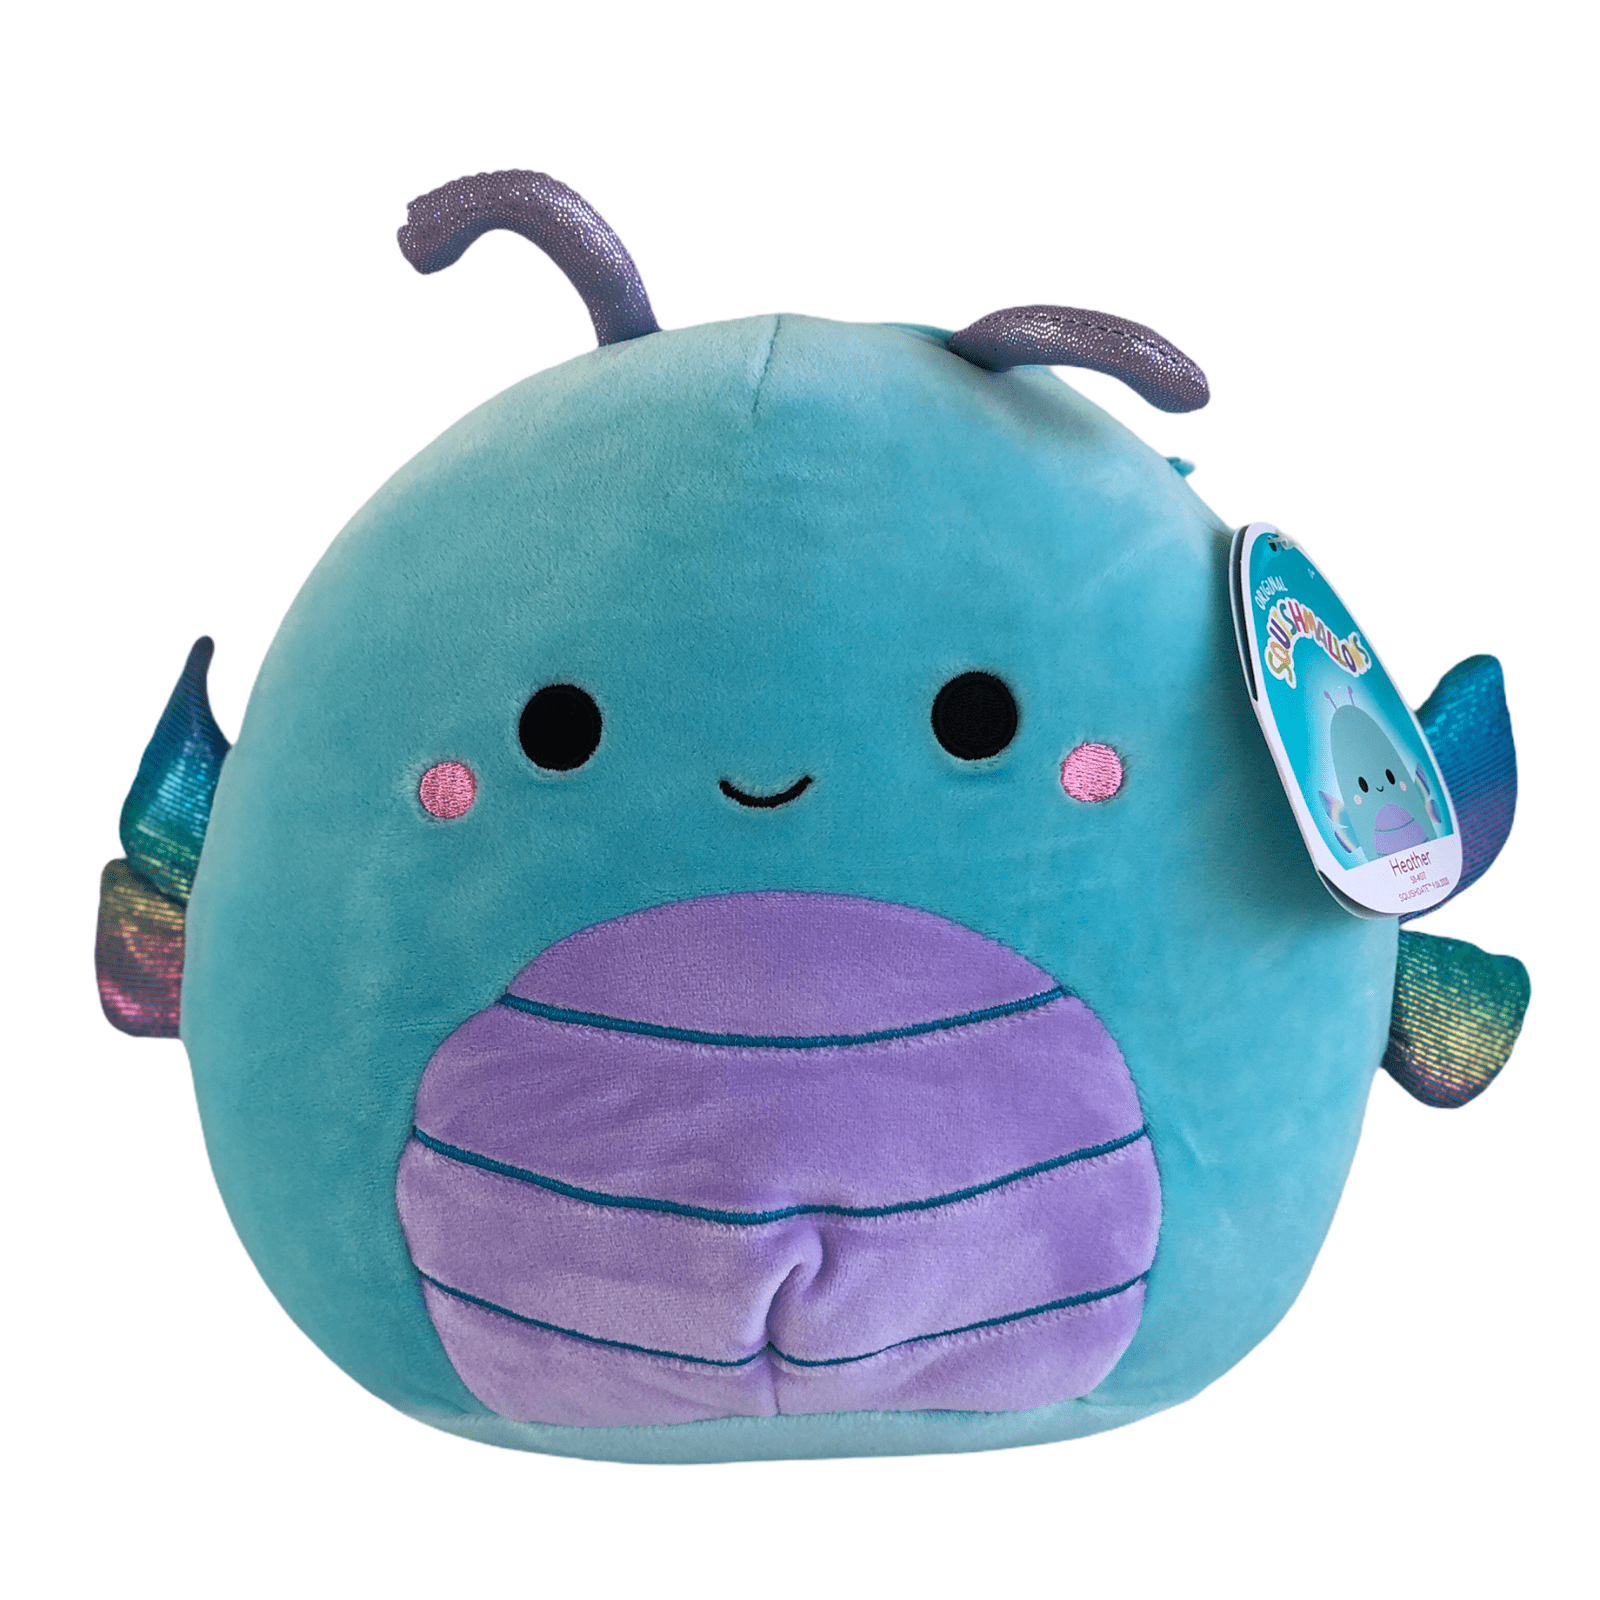 Heather the Blue Dragonfly 8” Squishmallow Spring 2021 Kellytoy Plush Dragonfly 